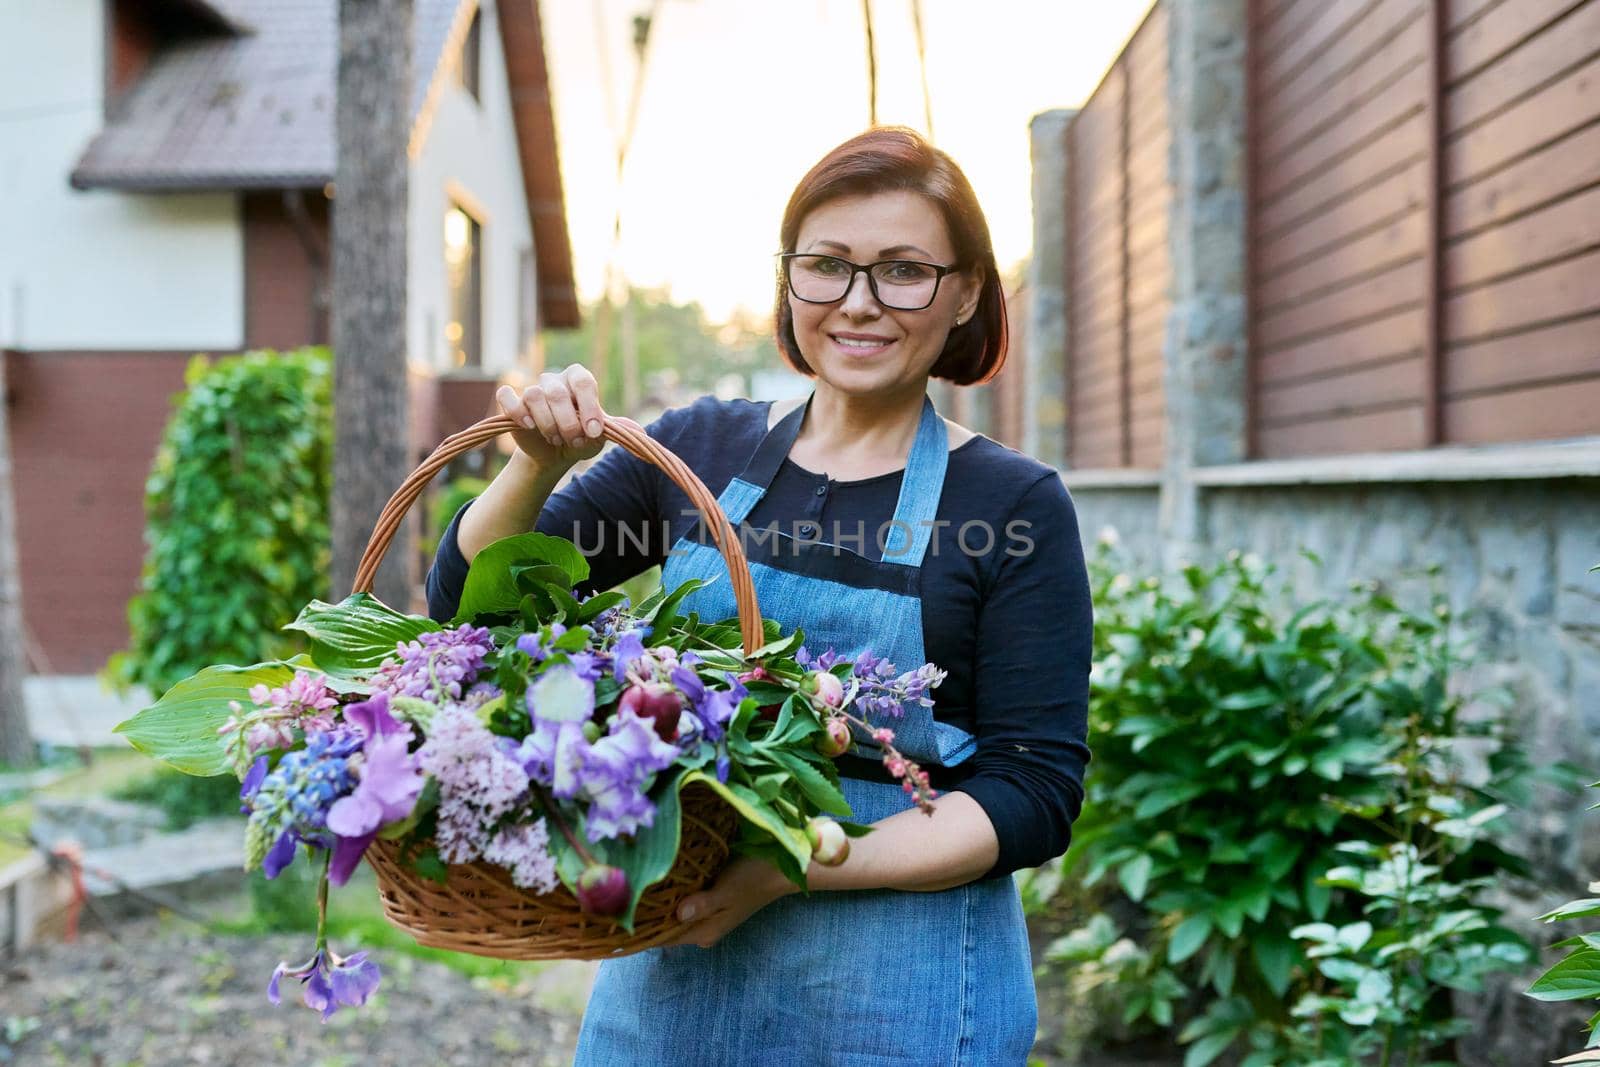 Middle-aged woman gardener florist in an apron with basket of fresh flowers folded in floral arrangement. Hobby, leisure, floristry, nature, beauty, gardening, creative bouquet, holiday concept